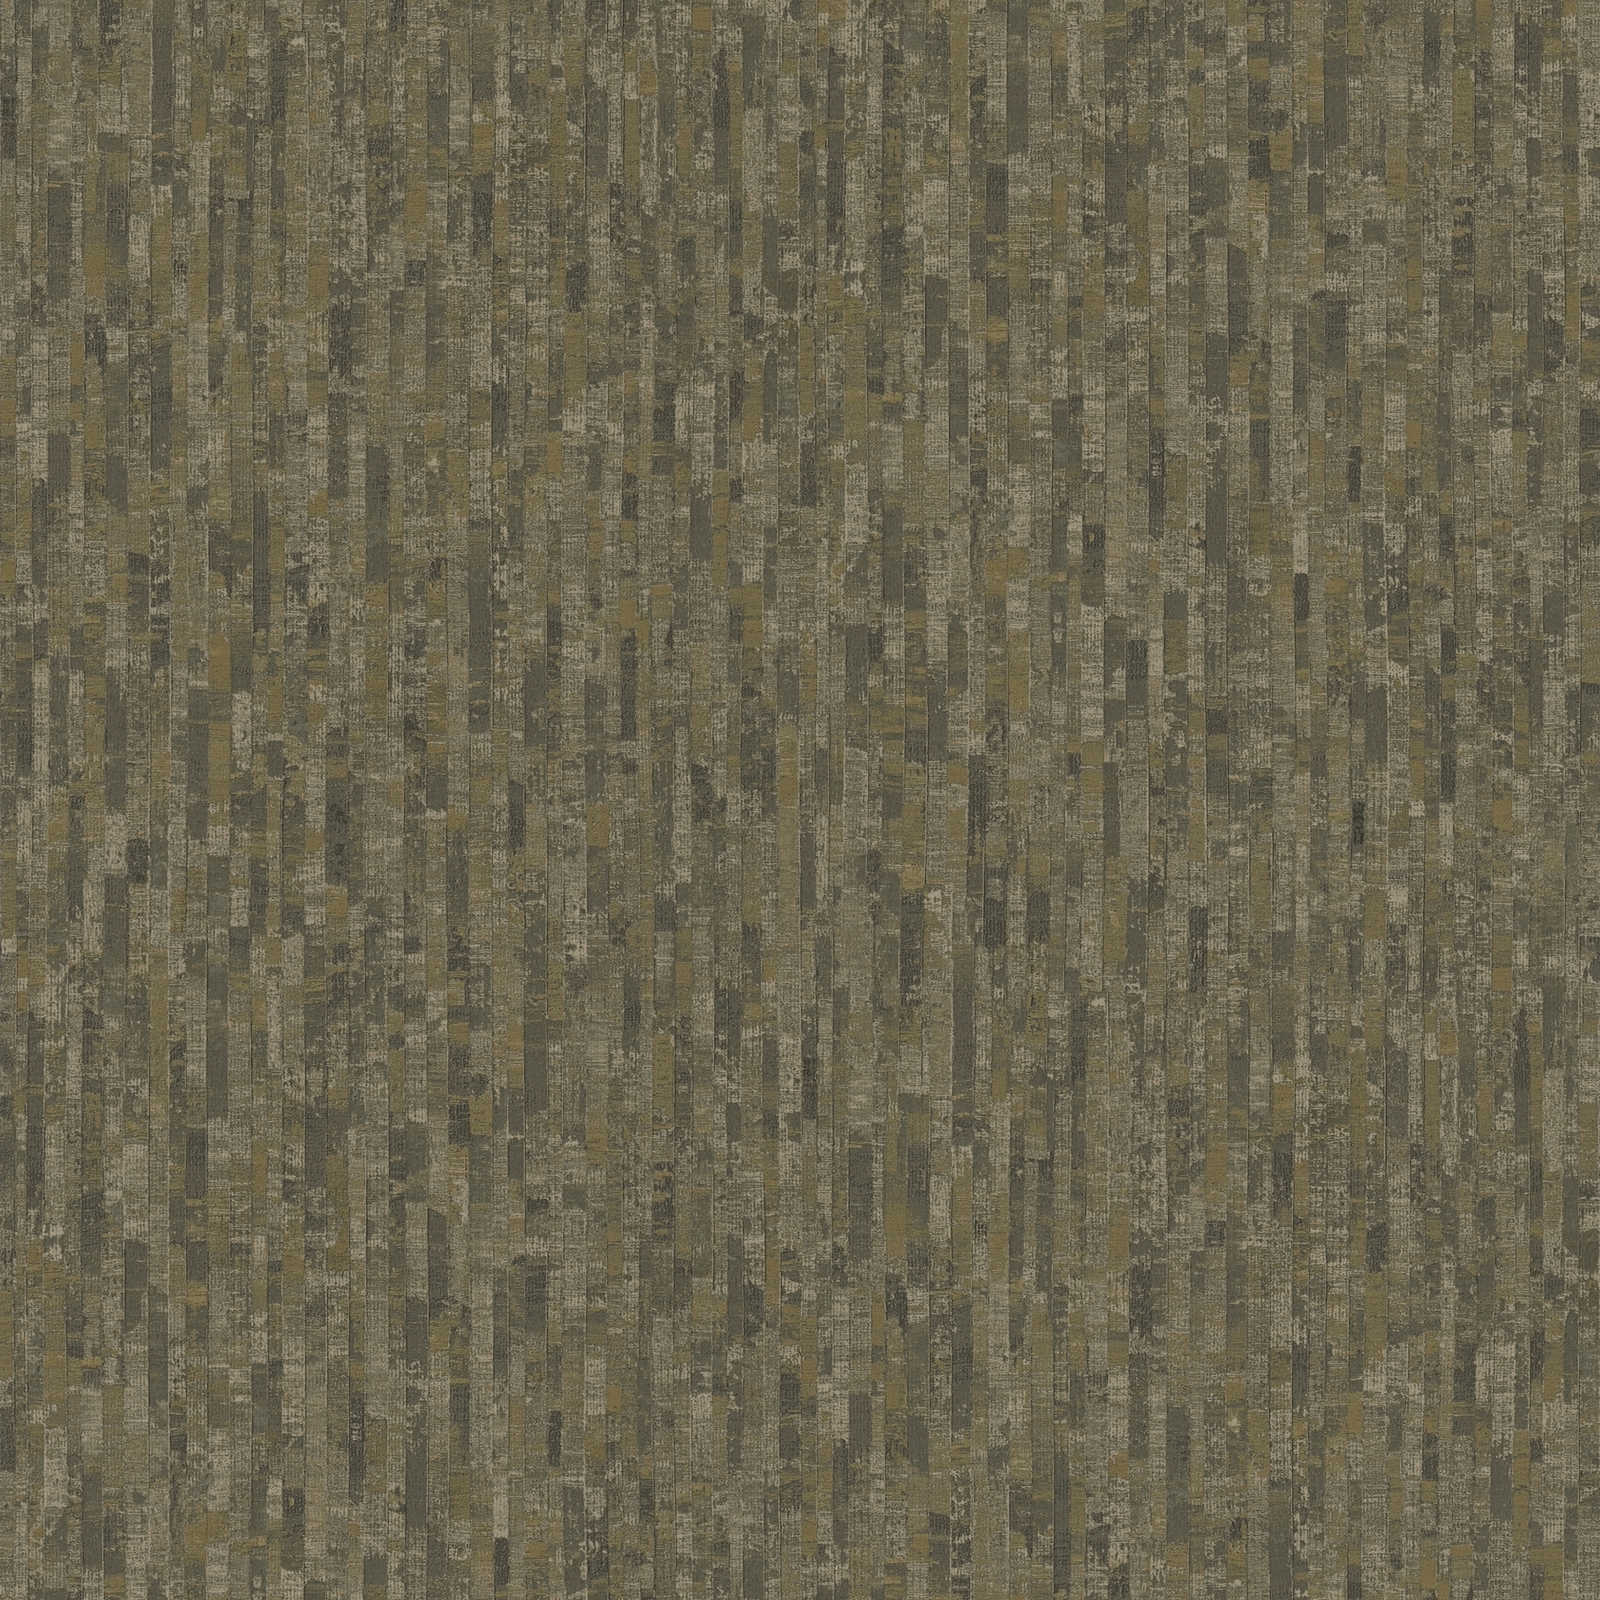 Olive brown wallpaper with natural textured pattern - Brown
